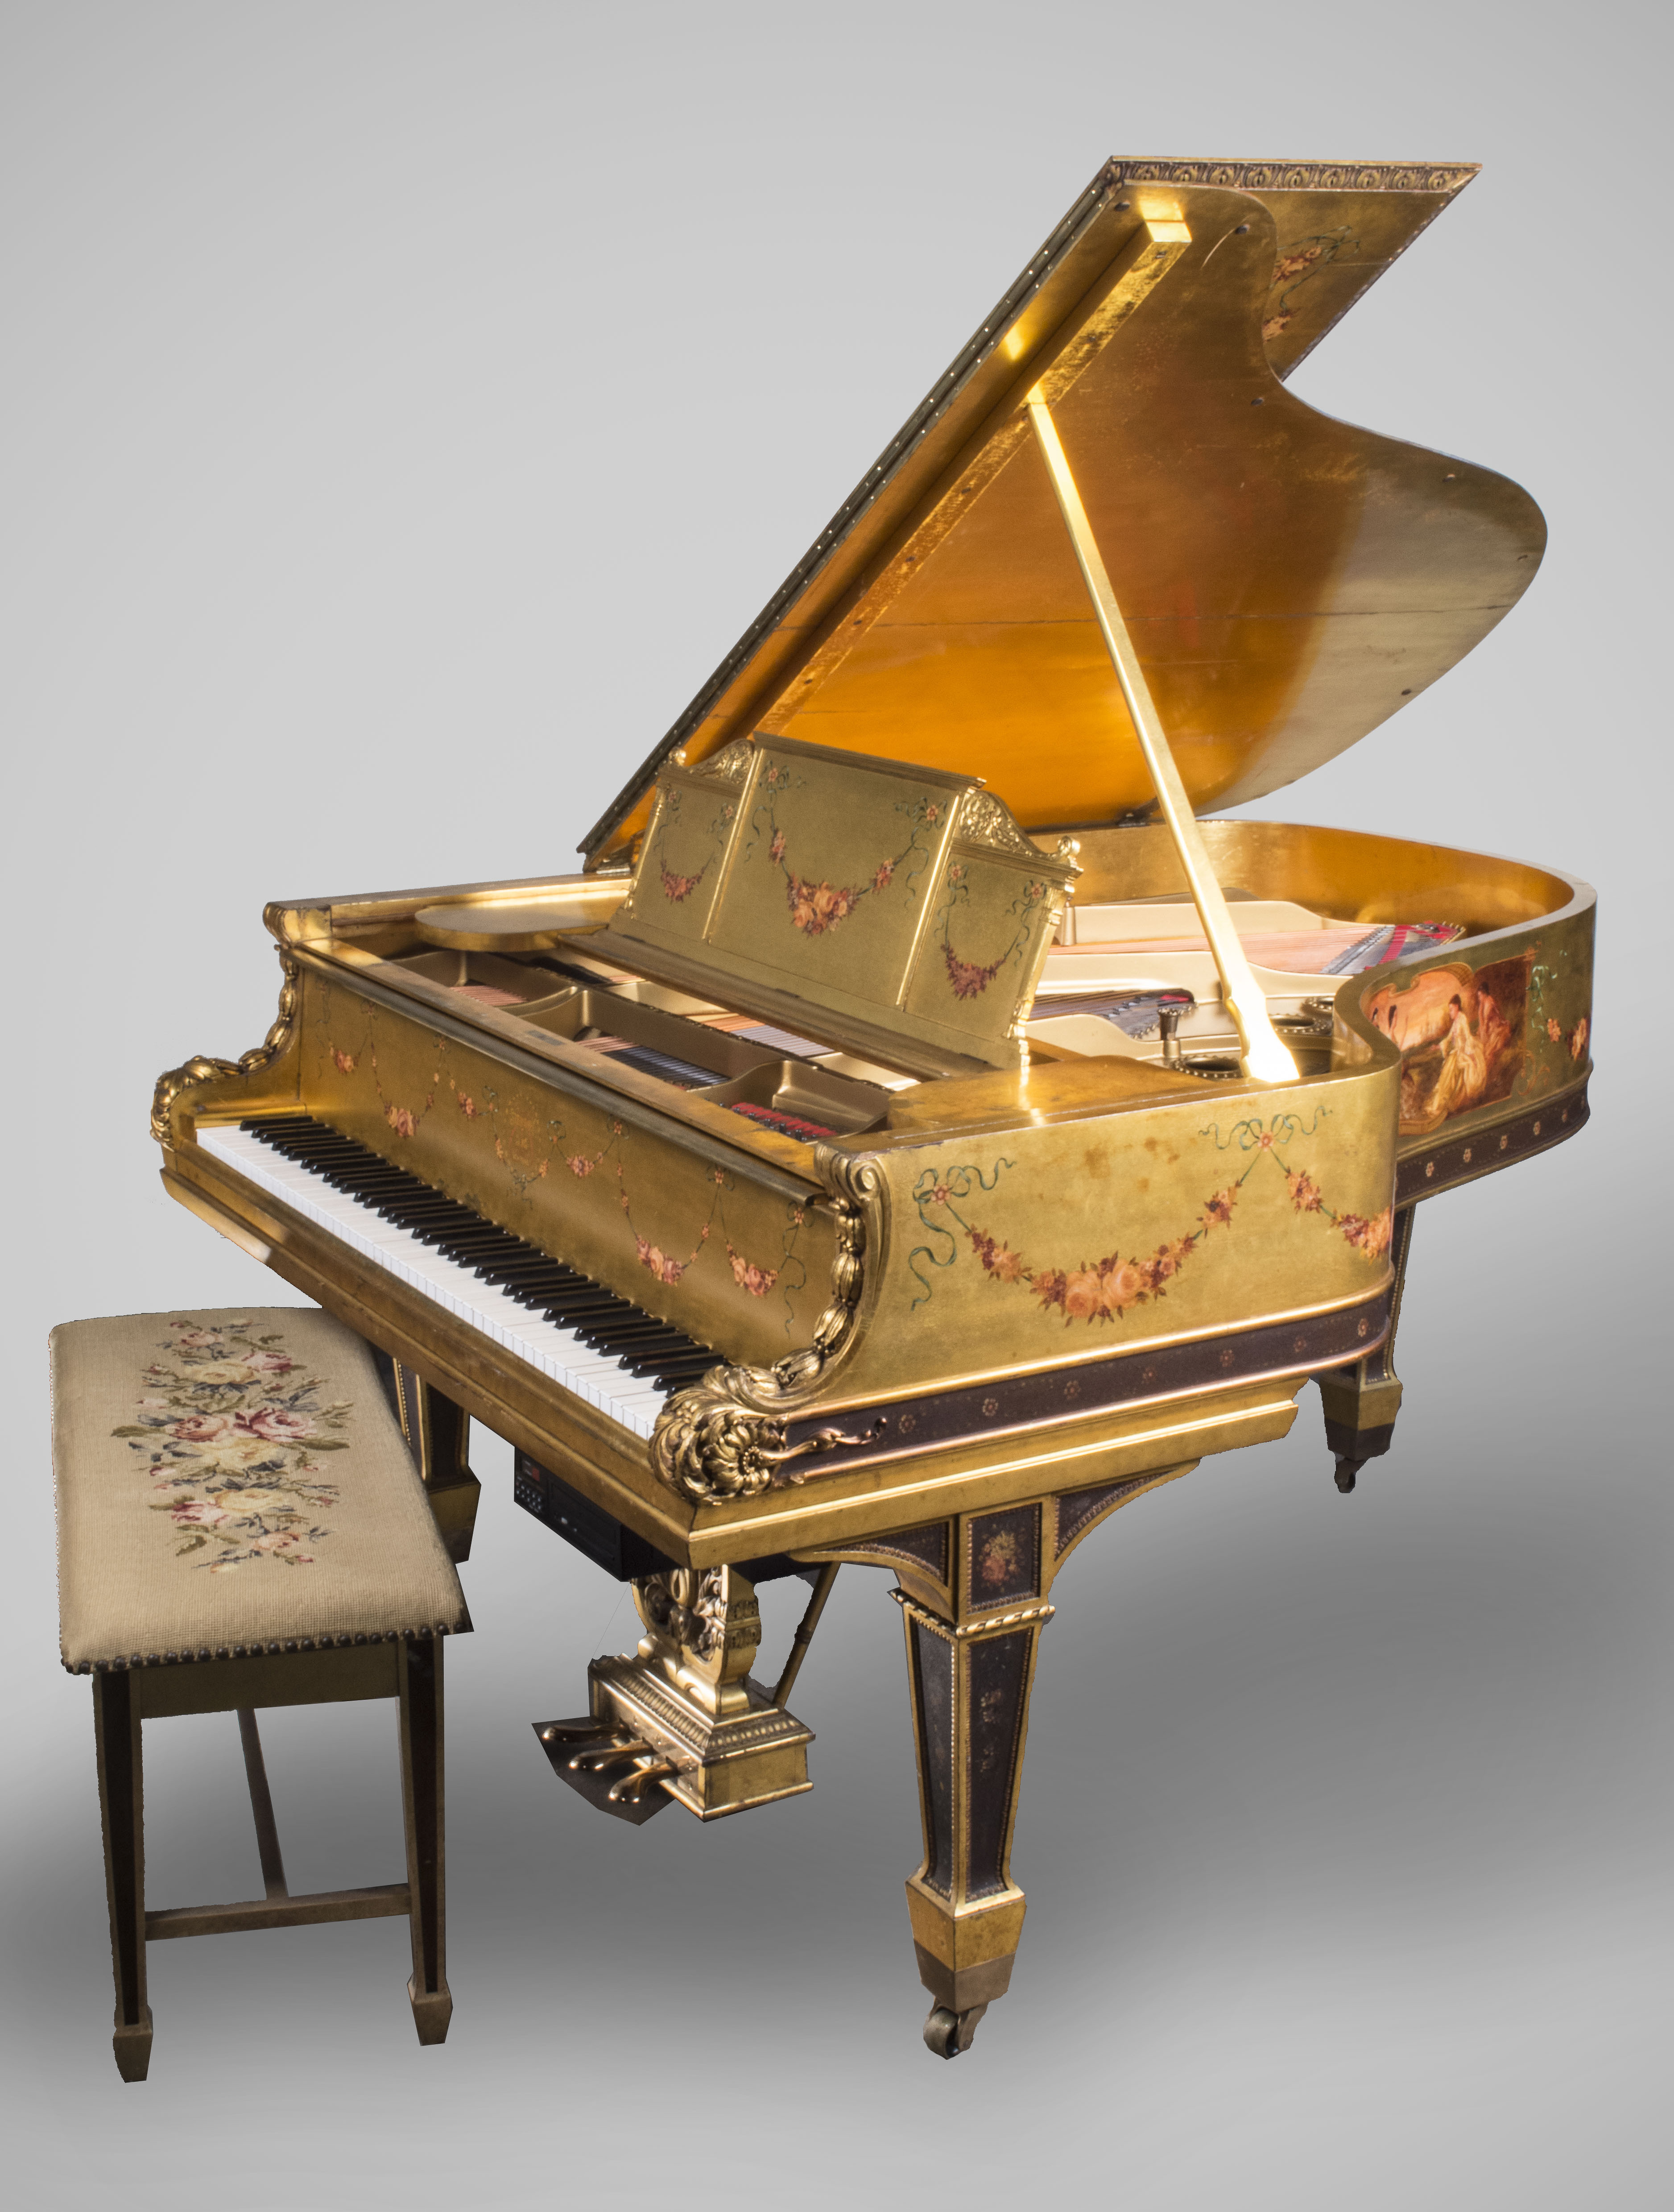 The Vernis Martin case painted with an allegorical scene helped this rare Steinway player grand piano to its selling price of $33,000. Capo Auction image